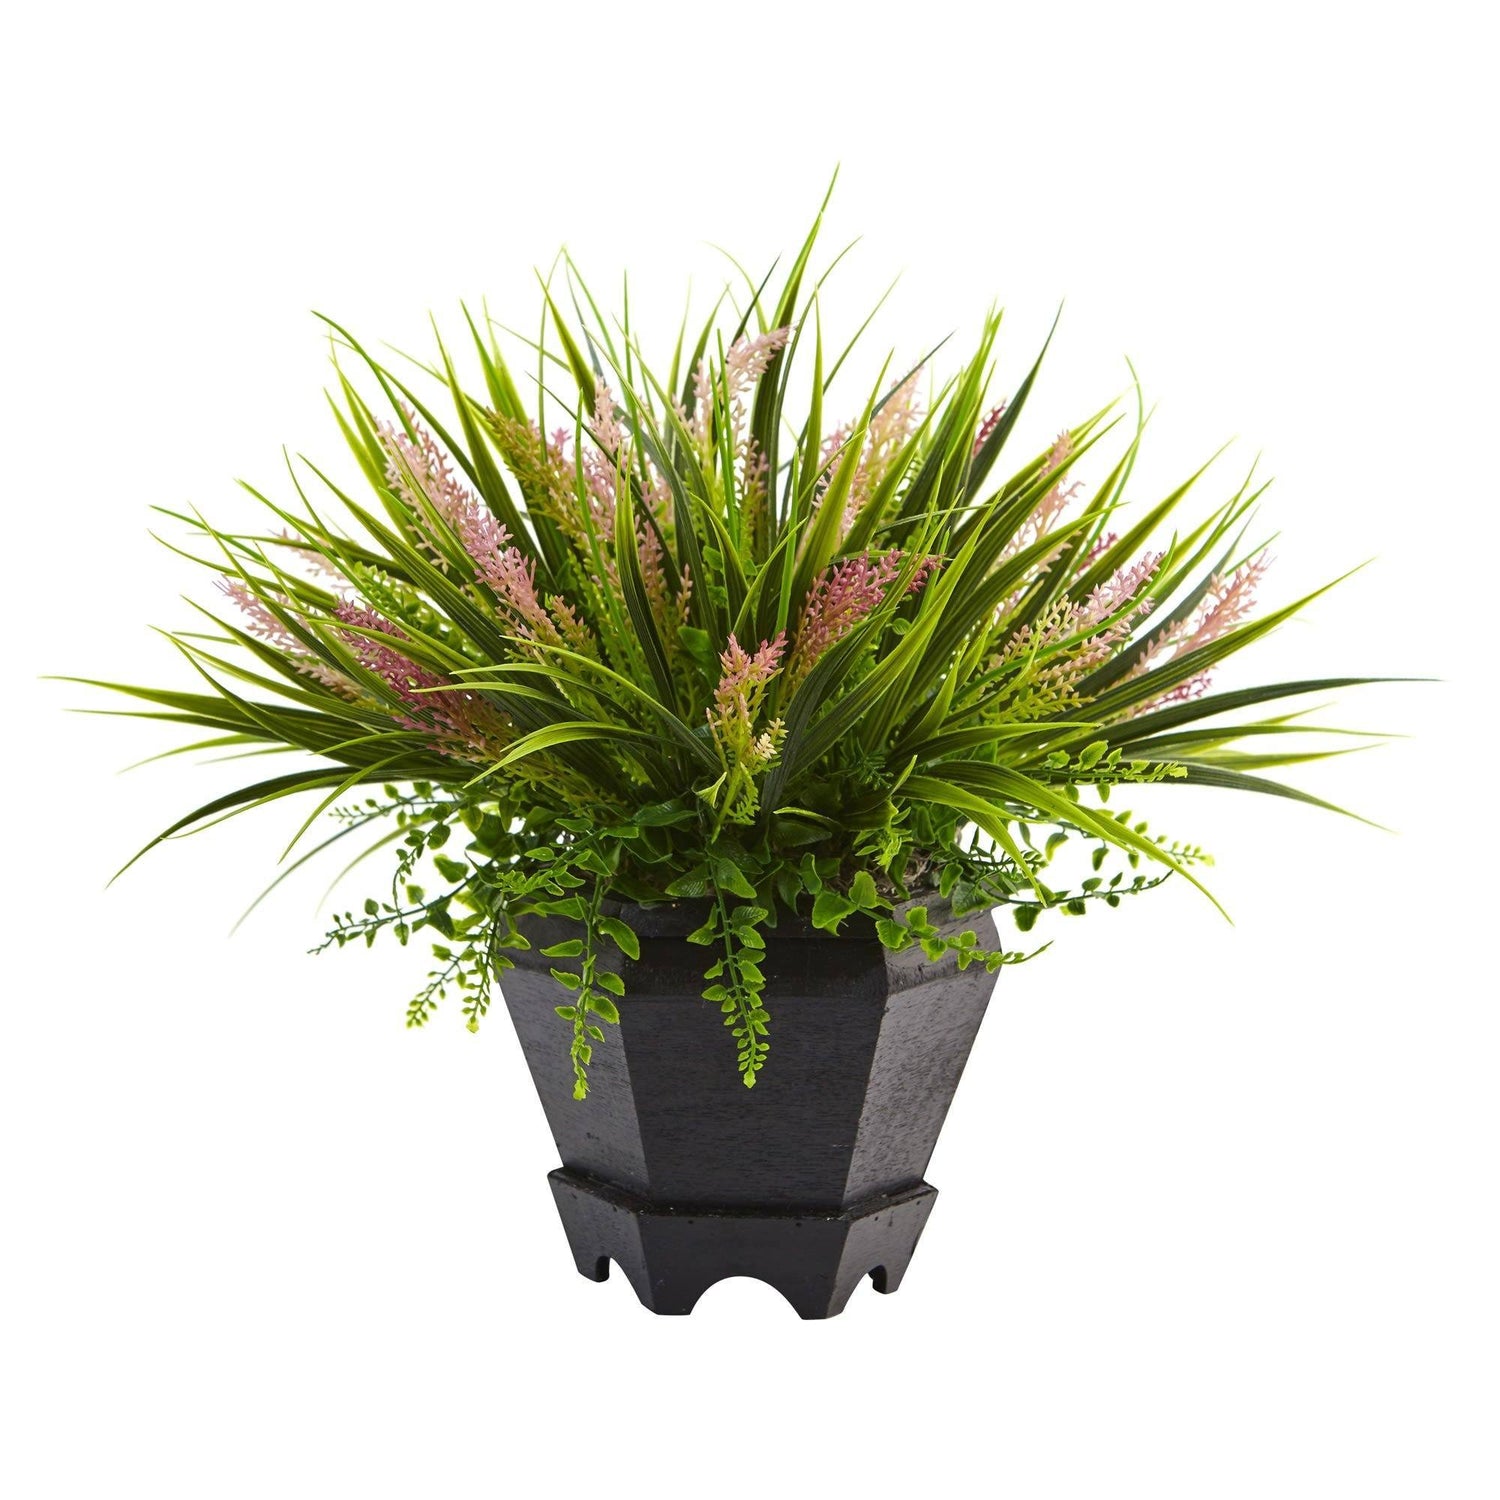 Grass with Planter